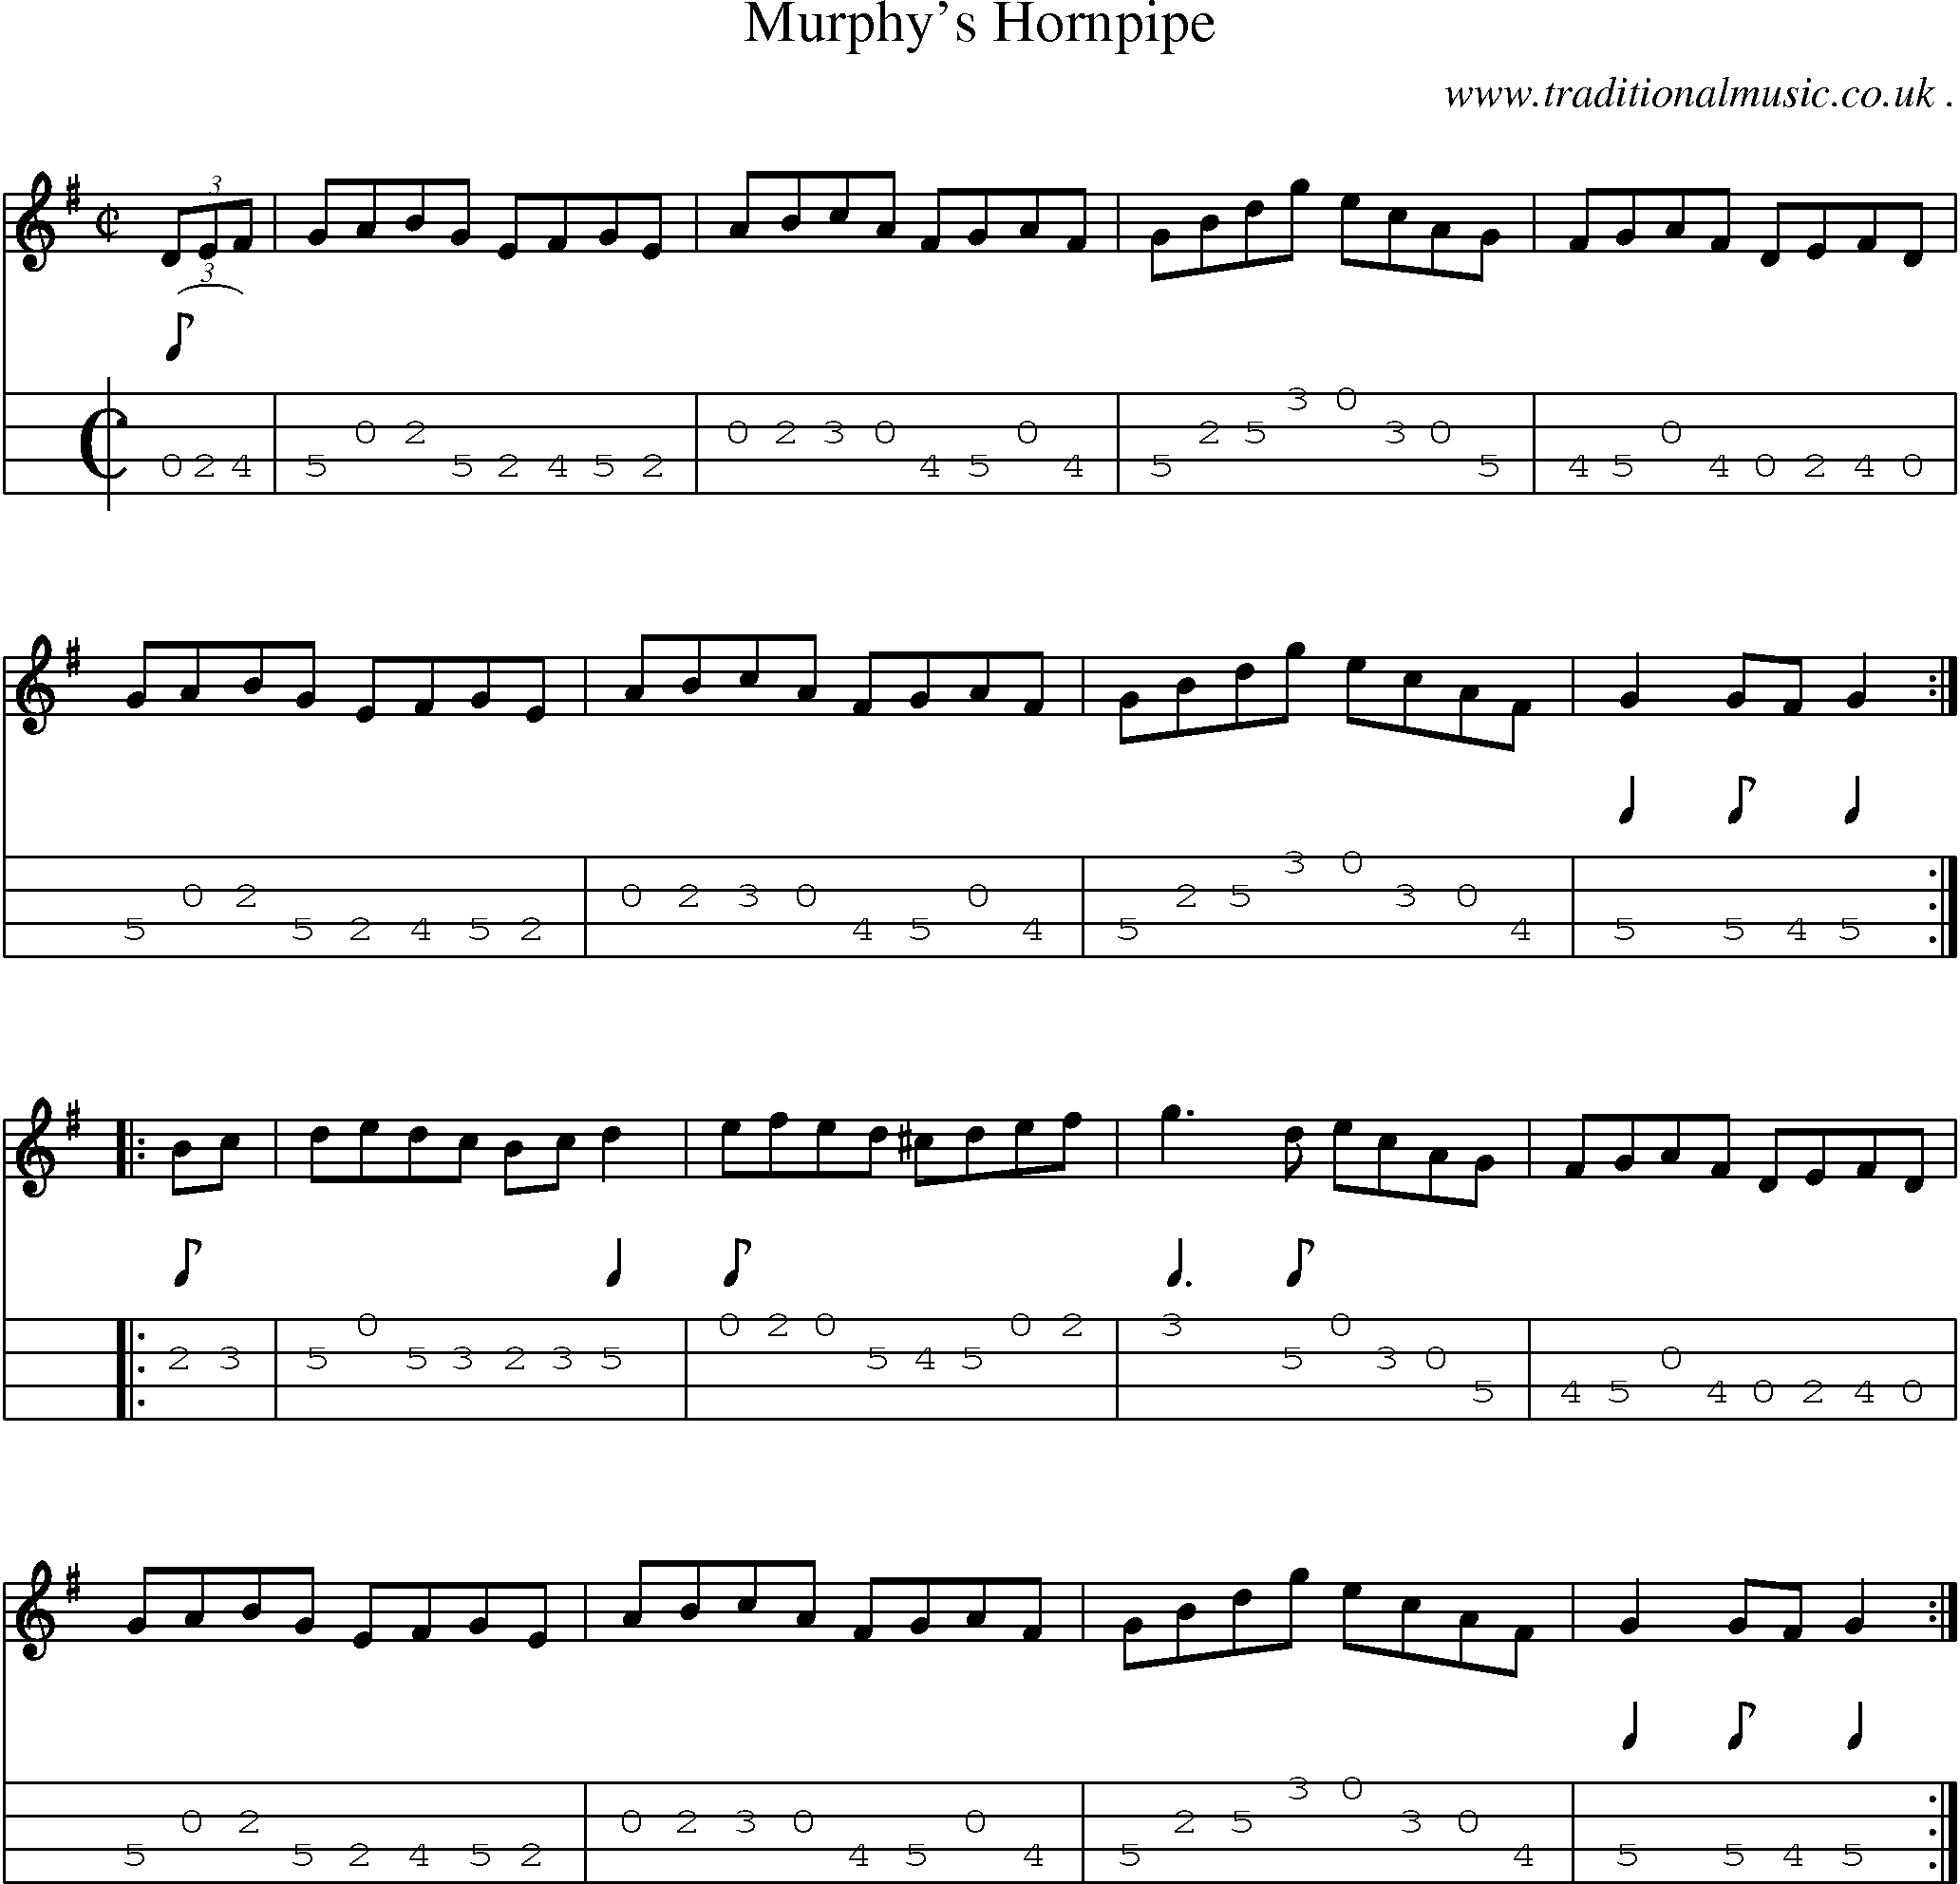 Sheet-Music and Mandolin Tabs for Murphys Hornpipe